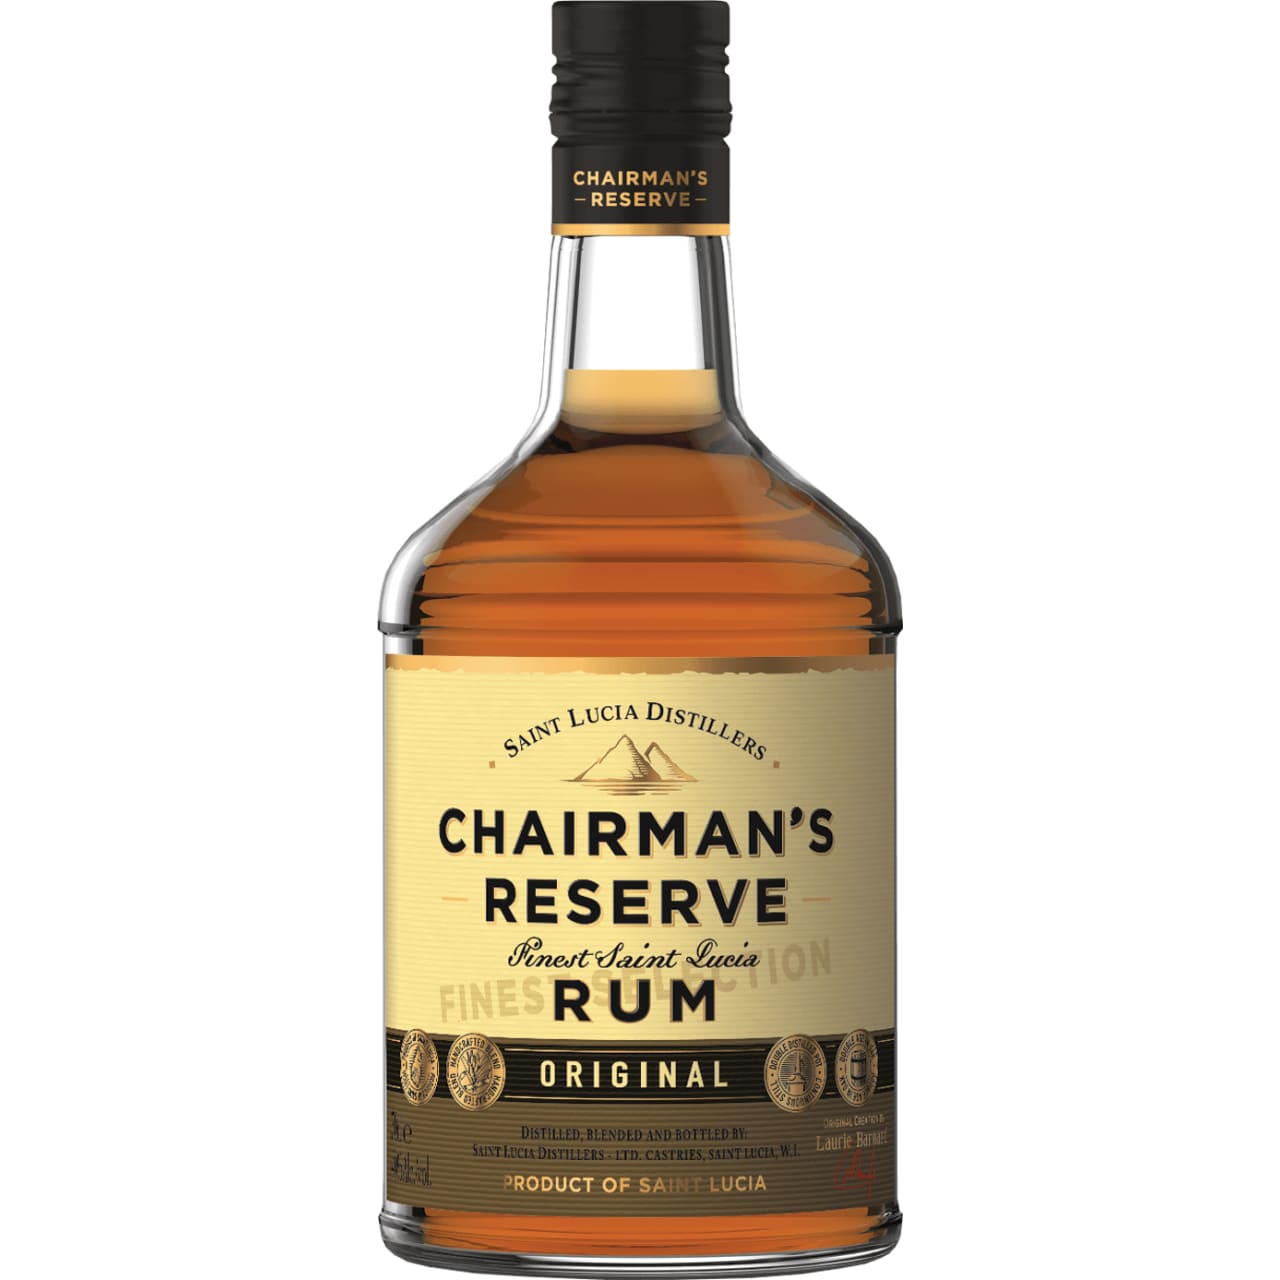 Rich dark amber in colour, with aromas of cooked banana, caramelised fruits and spicy oak derived vanilla, Chairman's Reserve St Lucia Rum is delicious on the rocks in a Daiquiri.